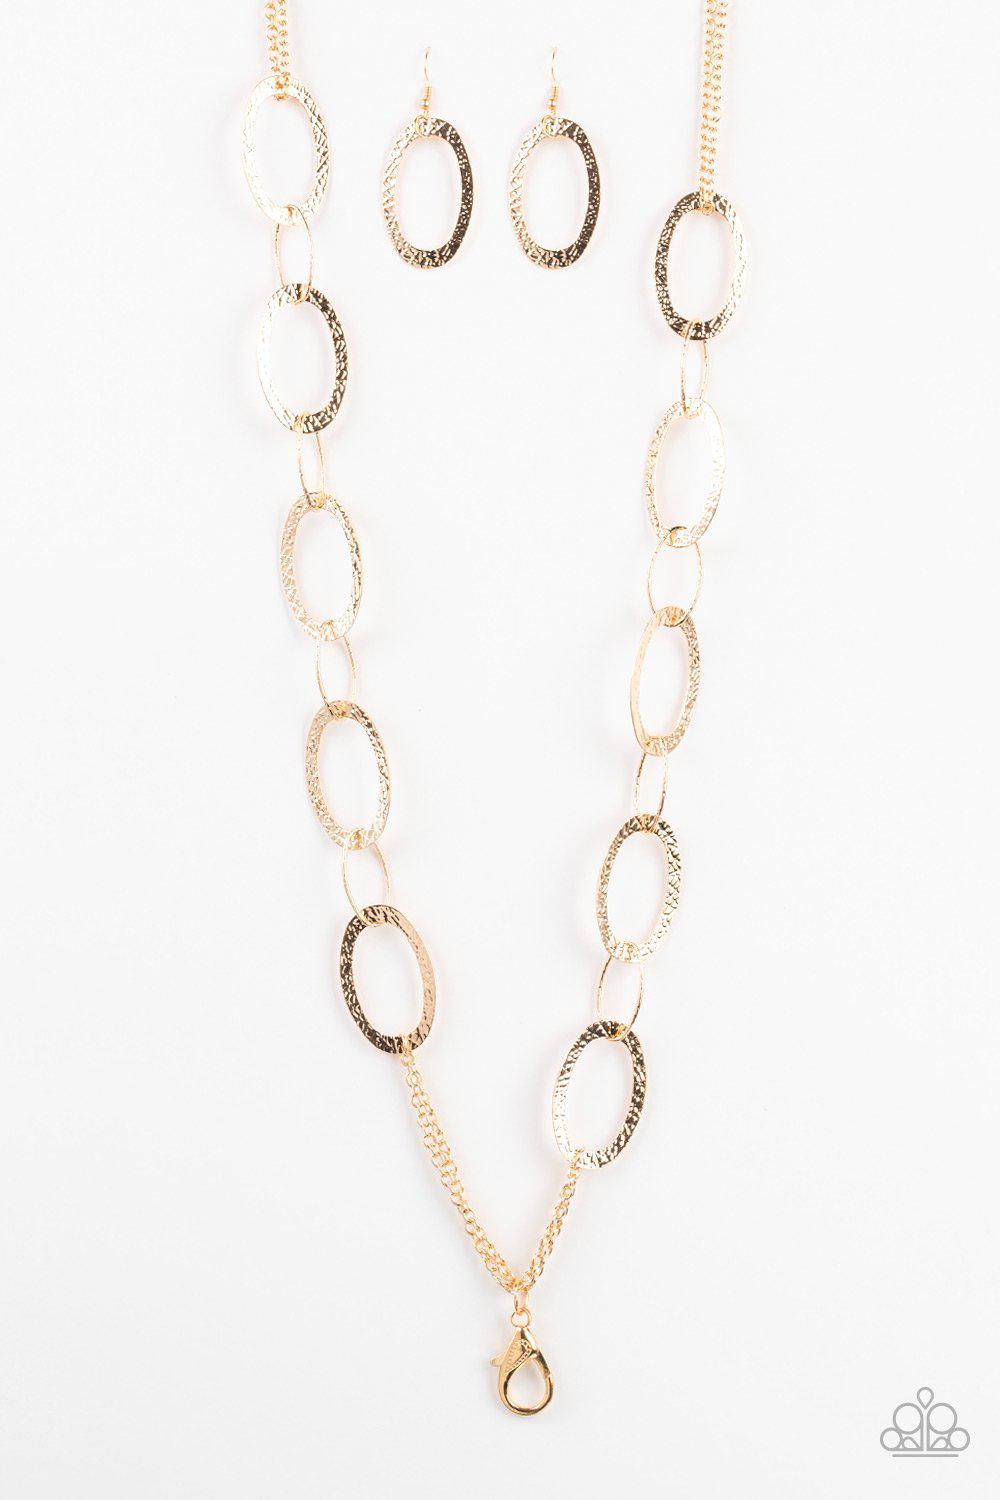 Glimmer Goals Gold Lanyard Necklace - Paparazzi Accessories-CarasShop.com - $5 Jewelry by Cara Jewels